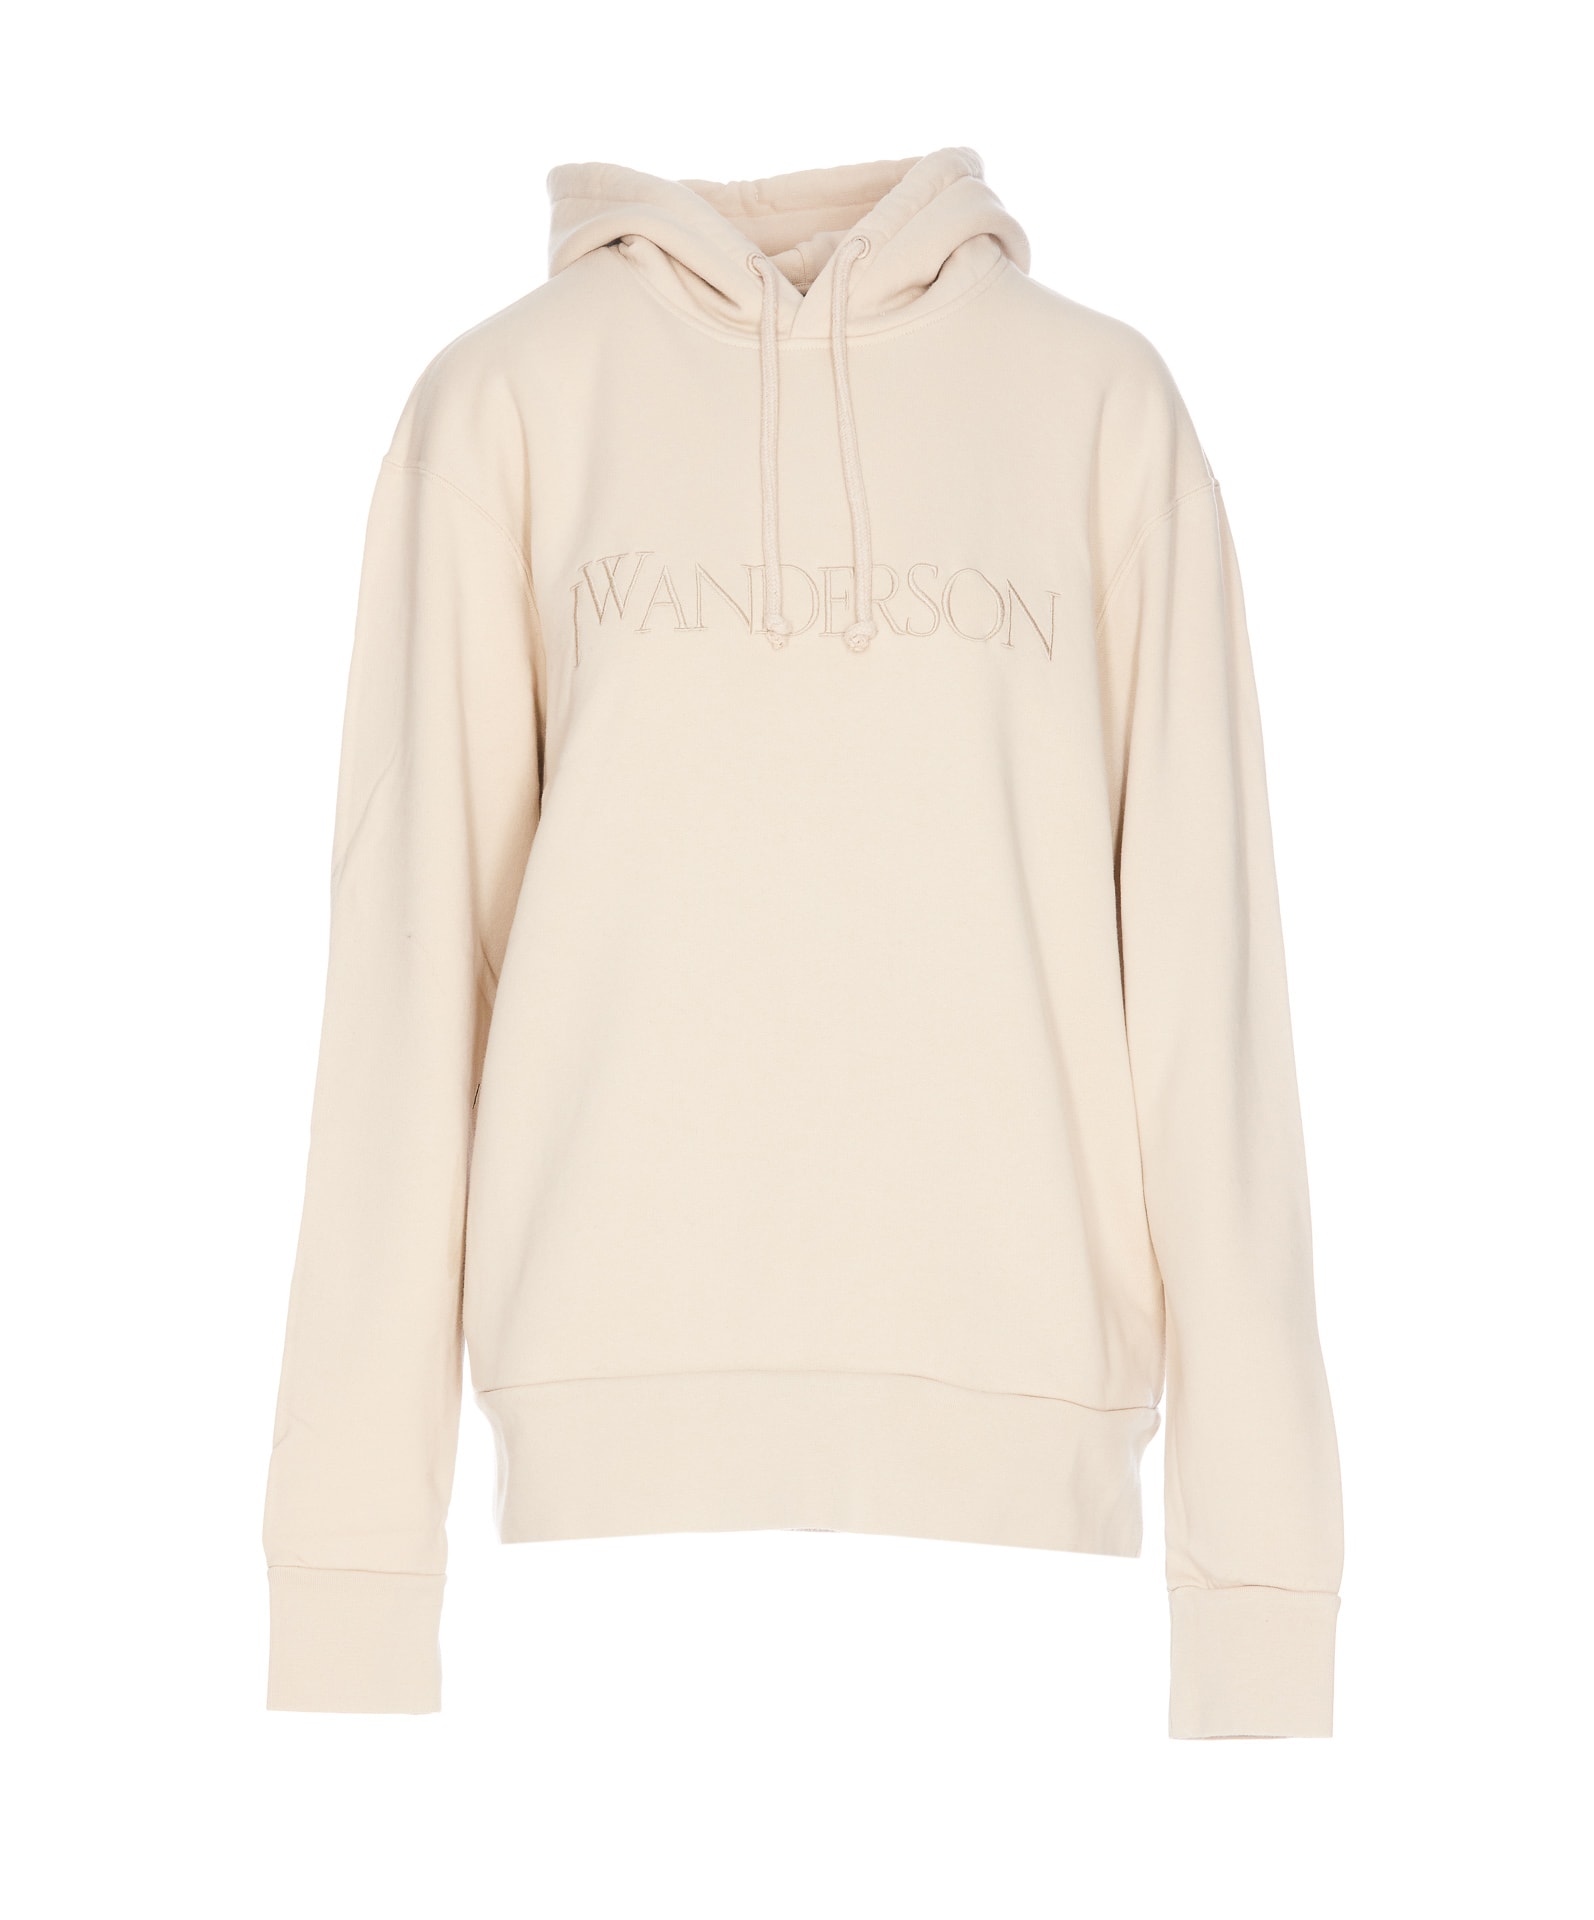 JW ANDERSON EMBROIDERED LOGO HOODIE